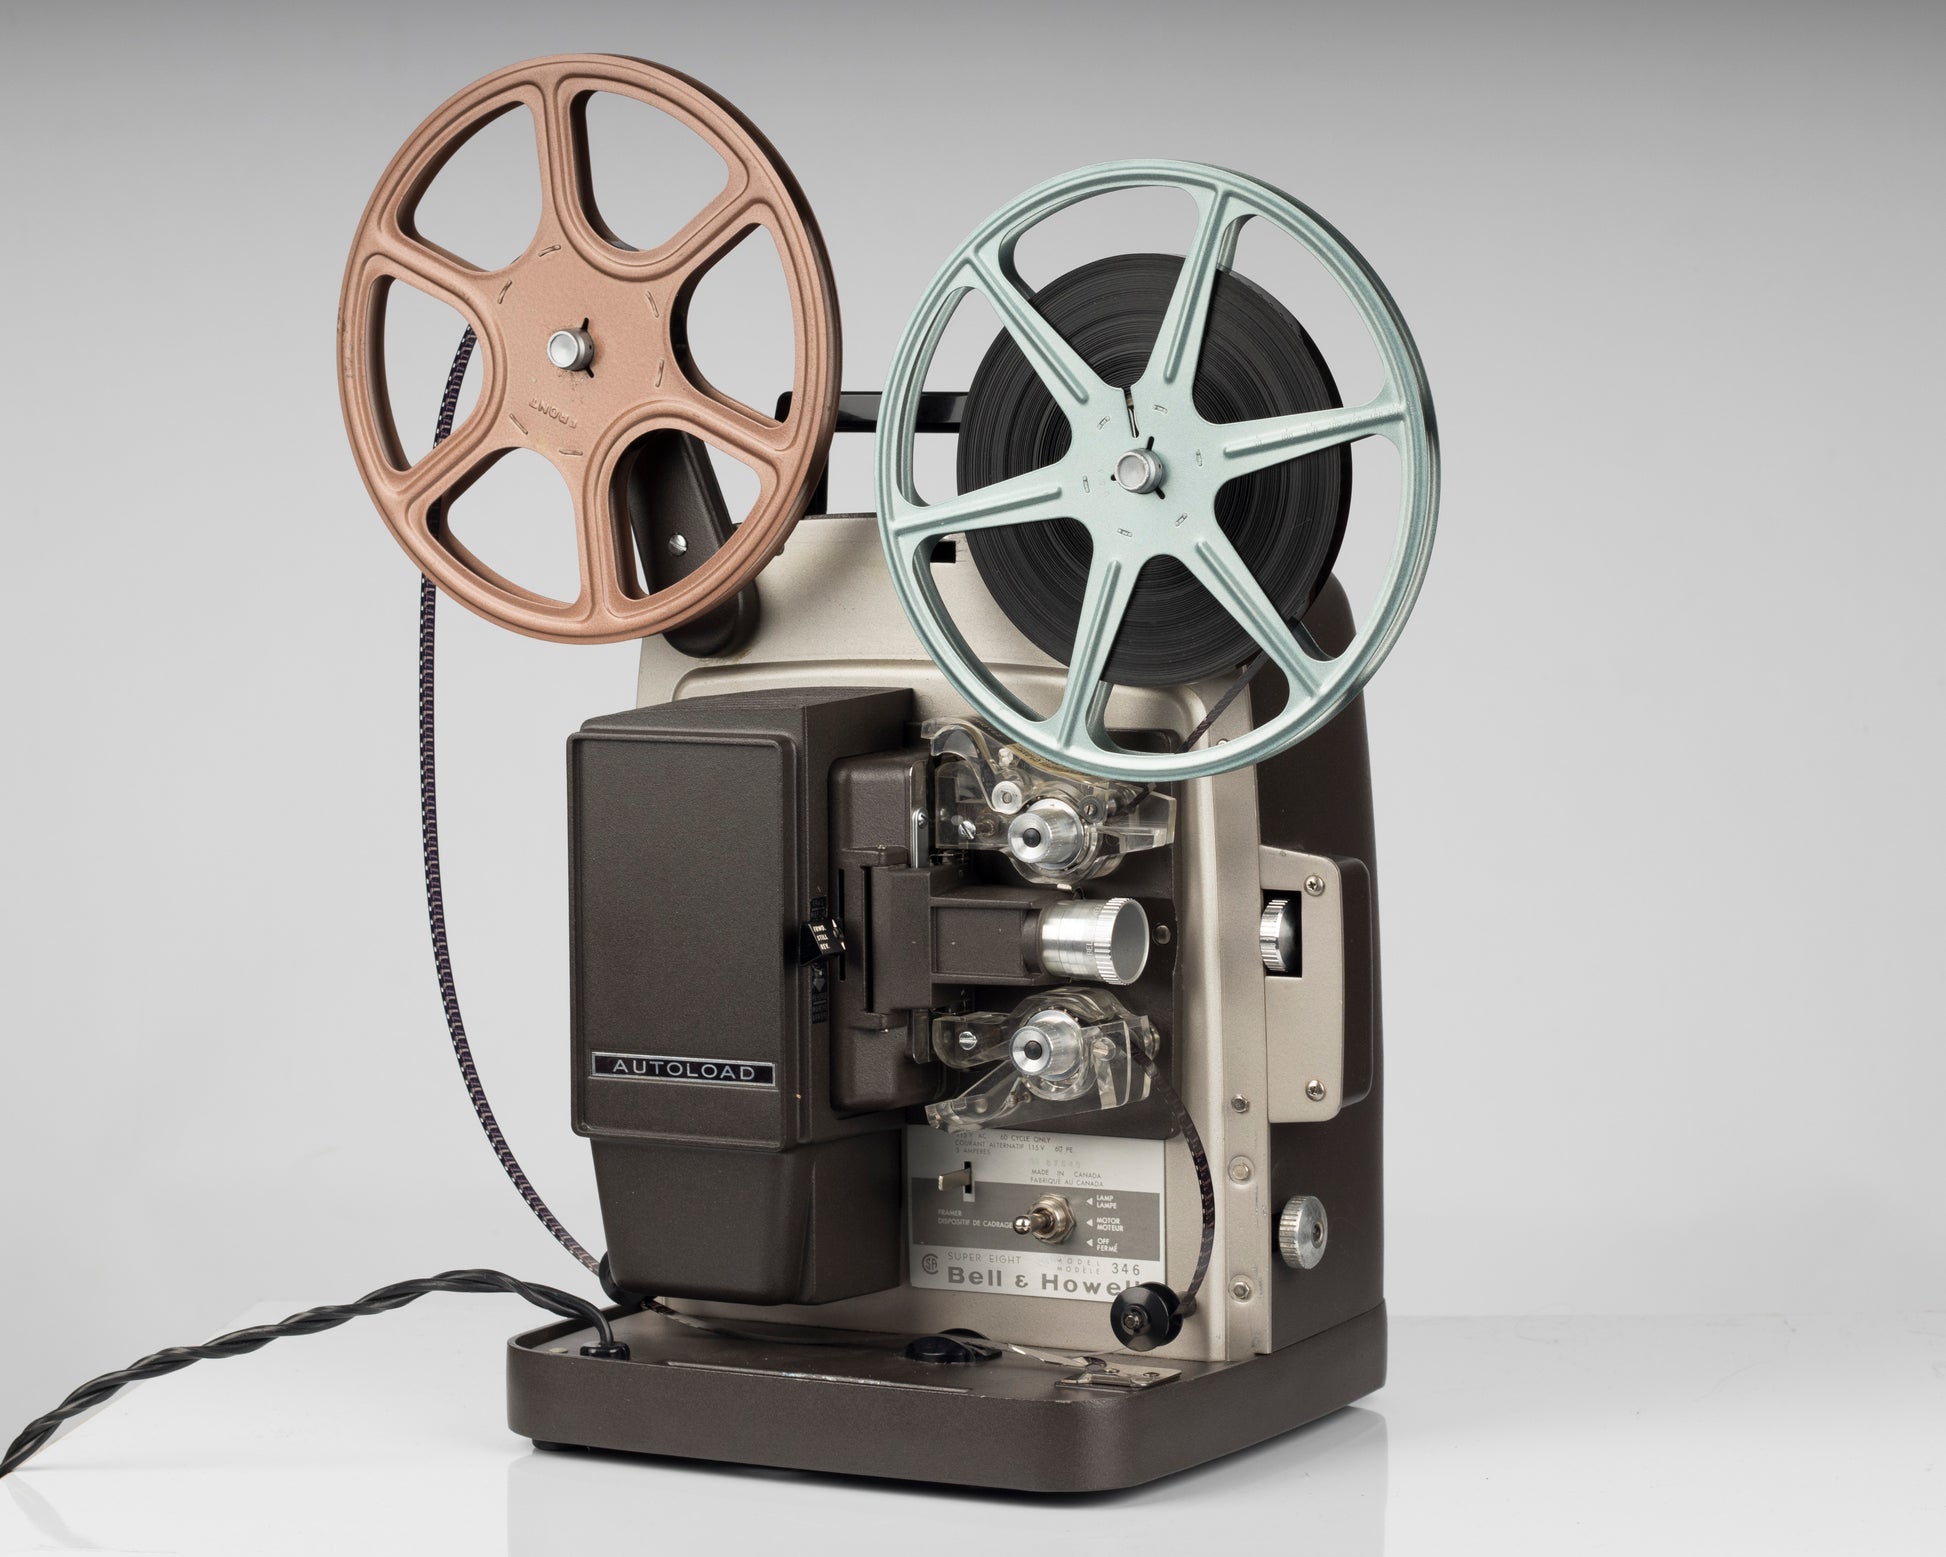 Super 8 Projector | Greeting Card